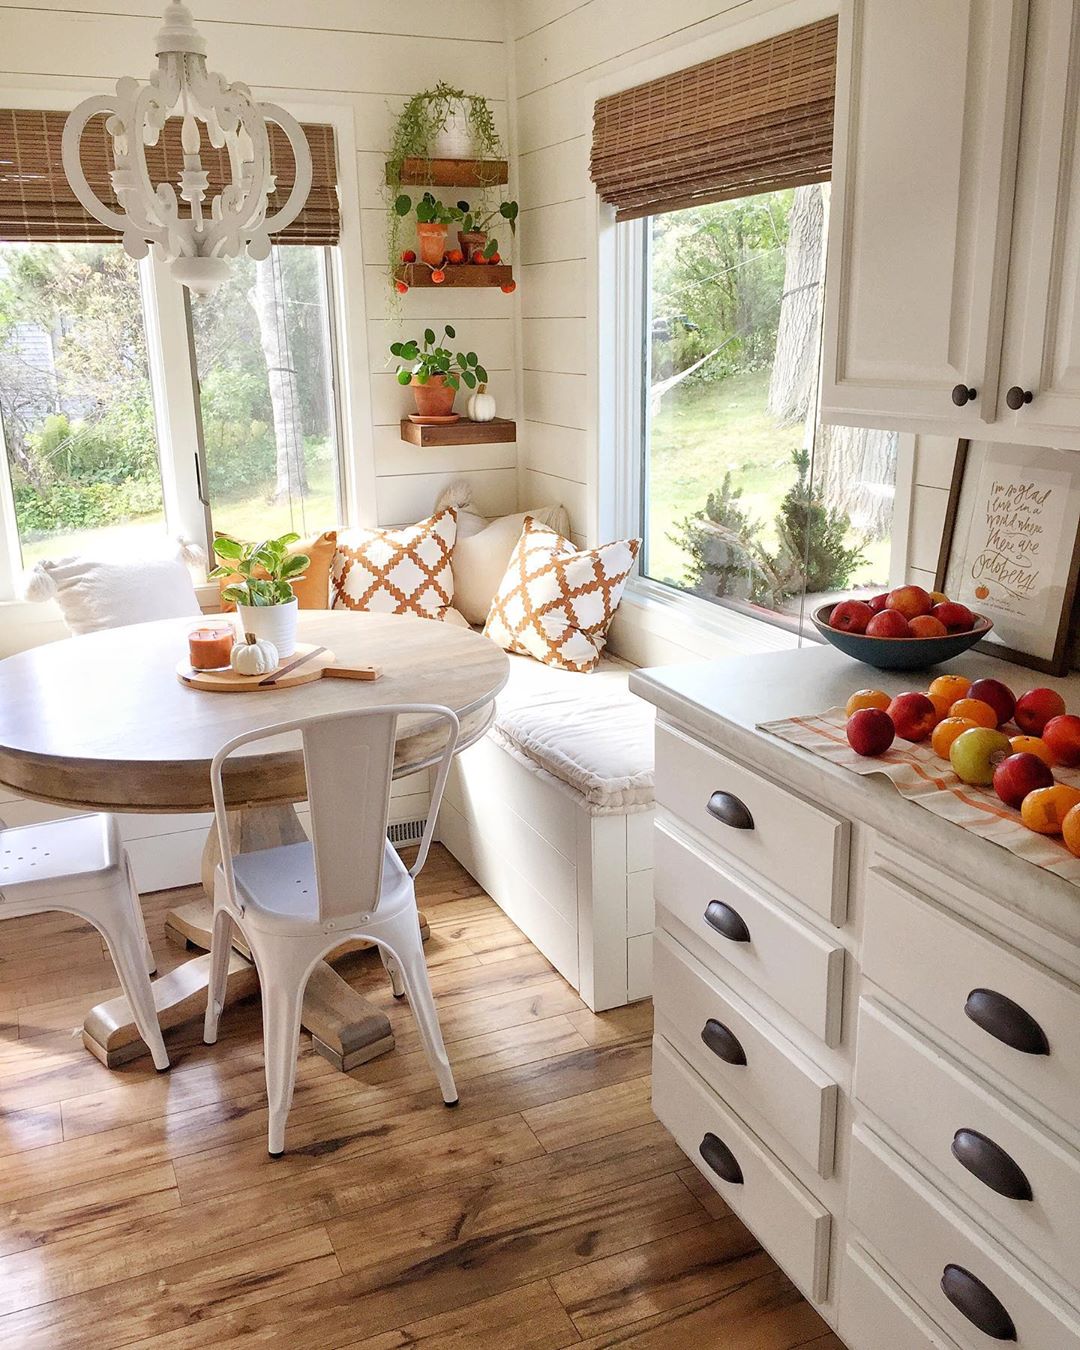 10 expert ideas for creating the perfect breakfast nook - decoholic